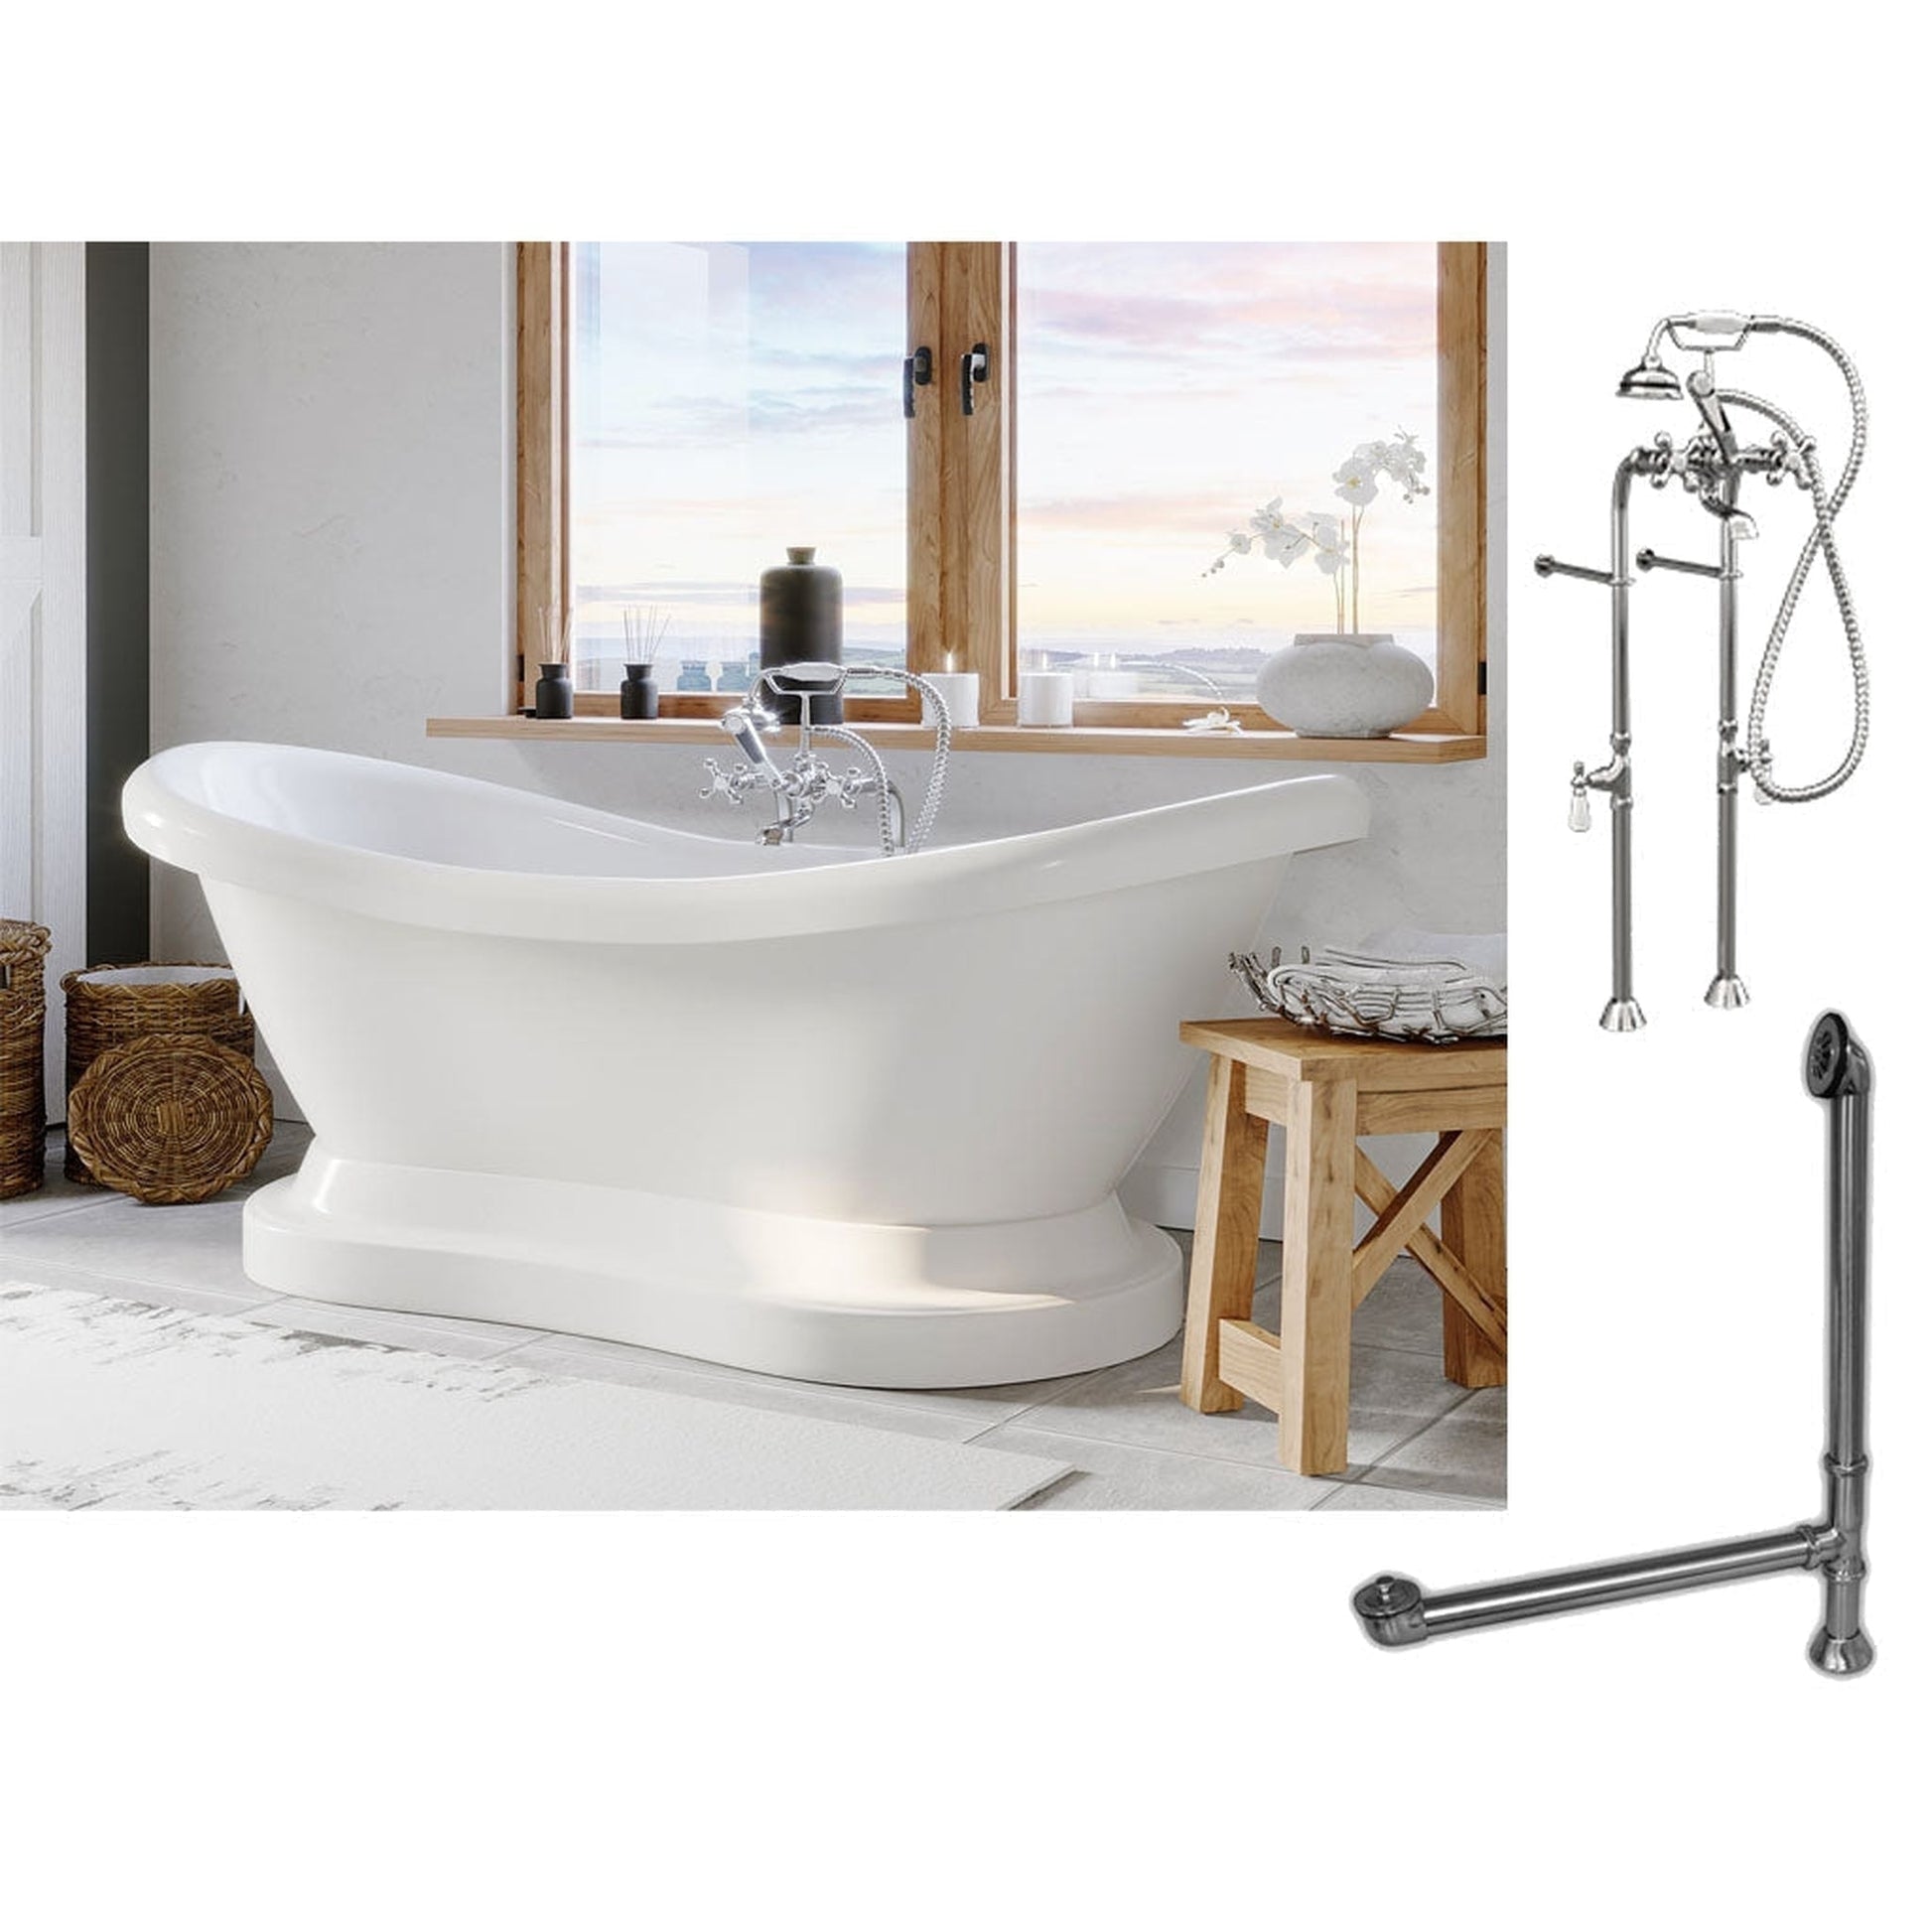 Cambridge Plumbing 69" White Double Slipper Pedestal Acrylic Bathtub With No Deck Holes And Complete Plumbing Package Including Floor Mounted British Telephone Faucet, Drain And Overflow Assembly In Polished Chrome